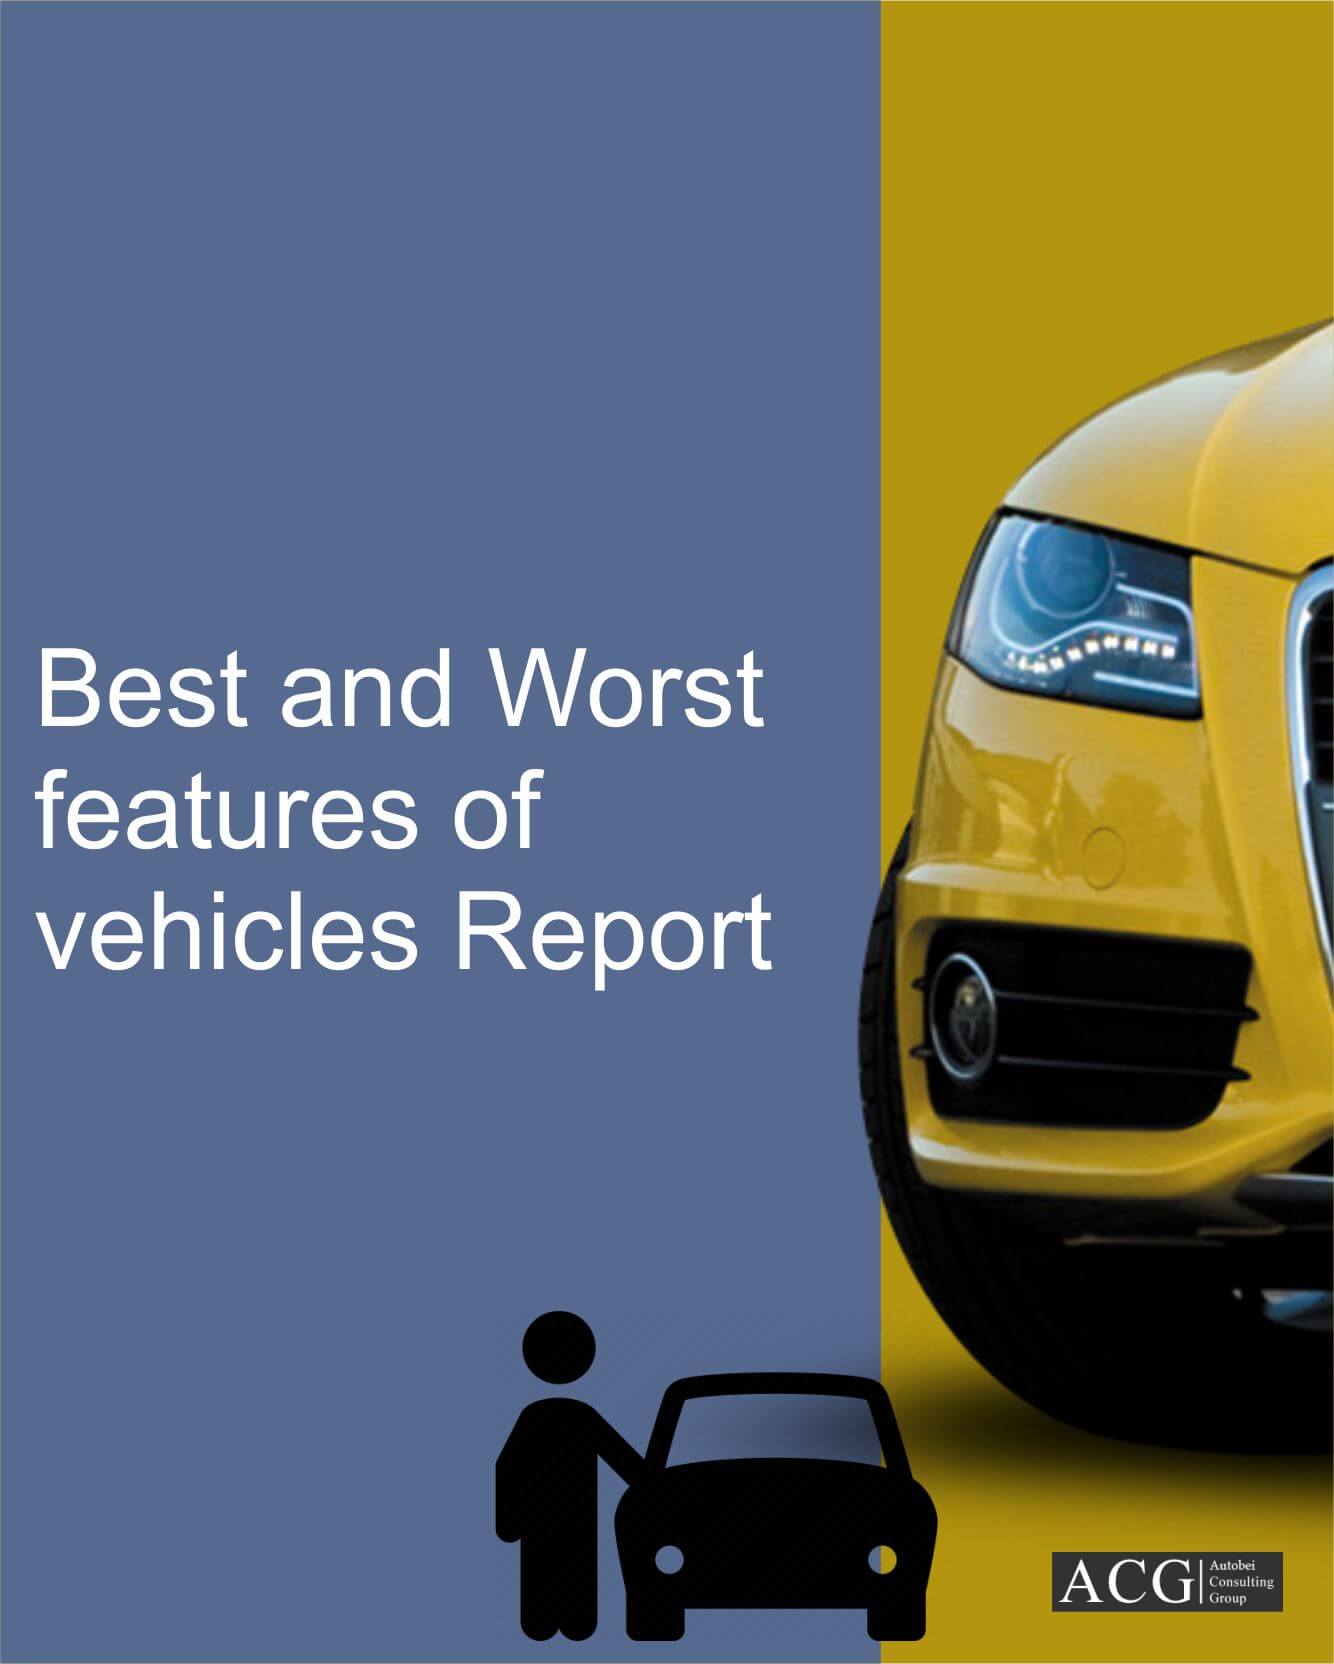 Best and Worst features of vehicles report